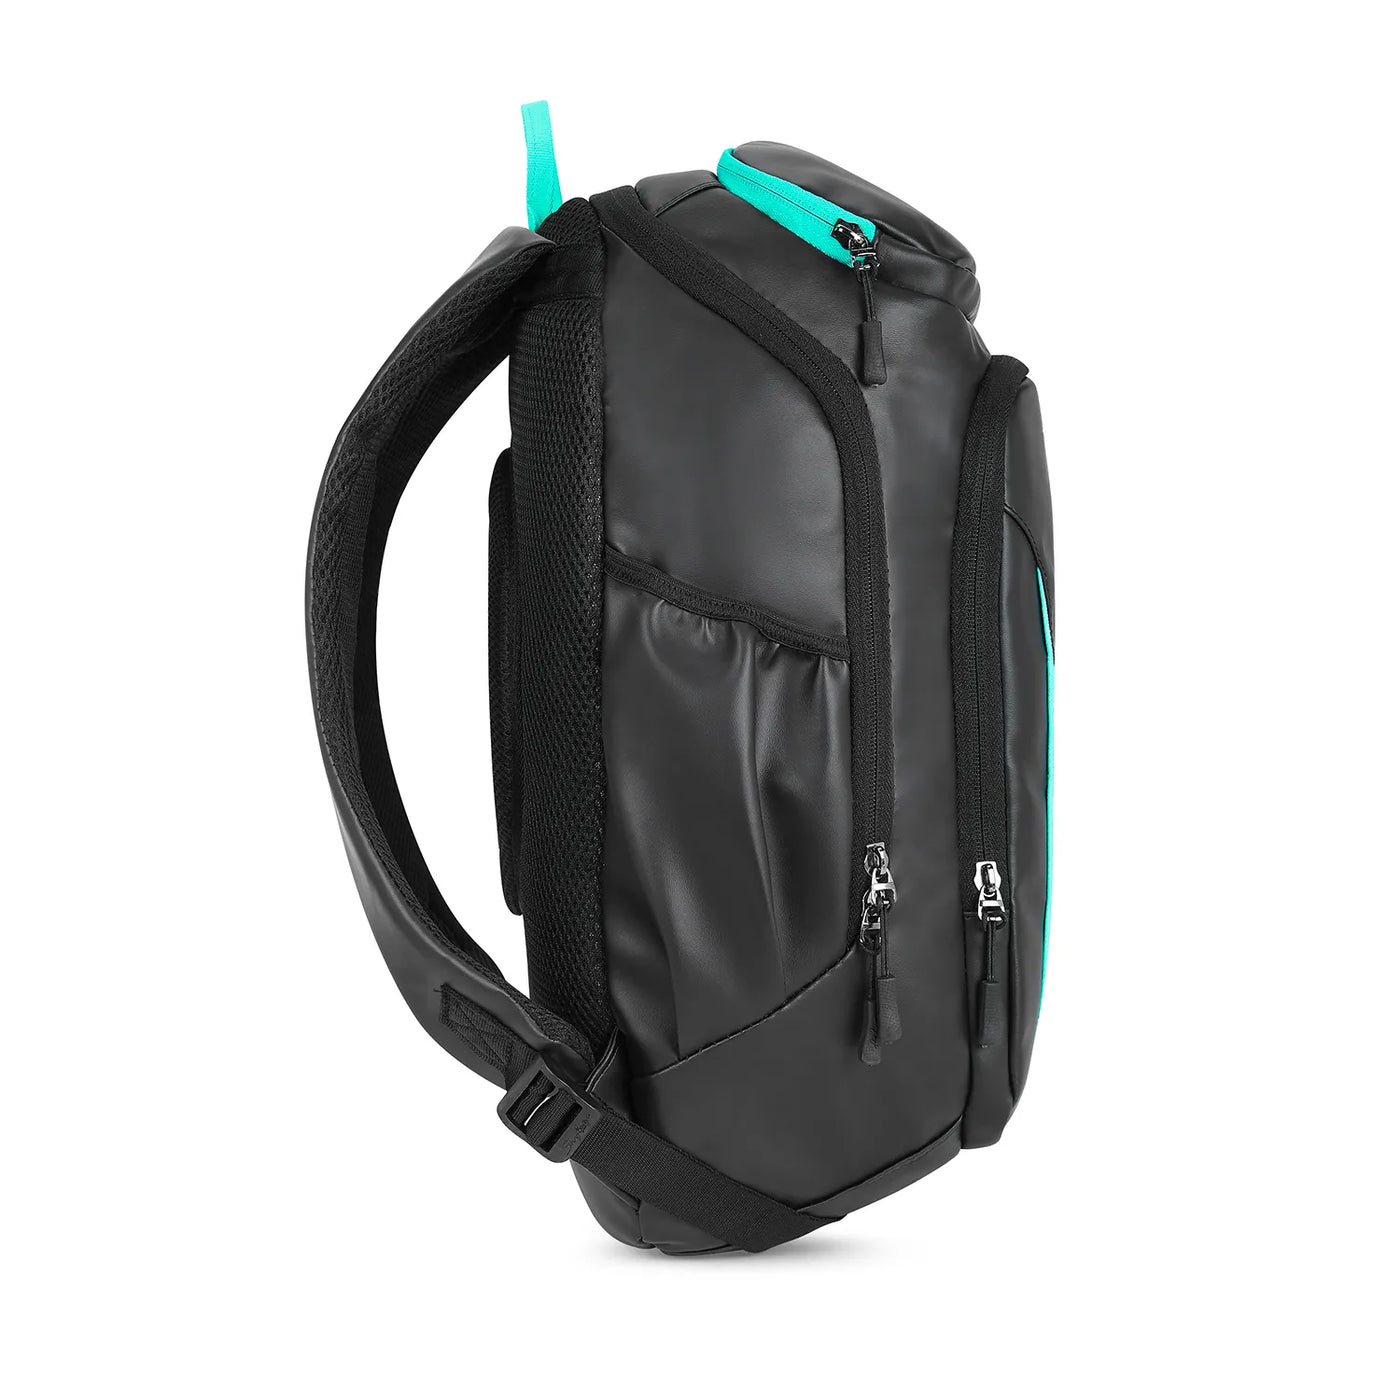 Skybags Valor NXT "02 Laptop Backpack Black"